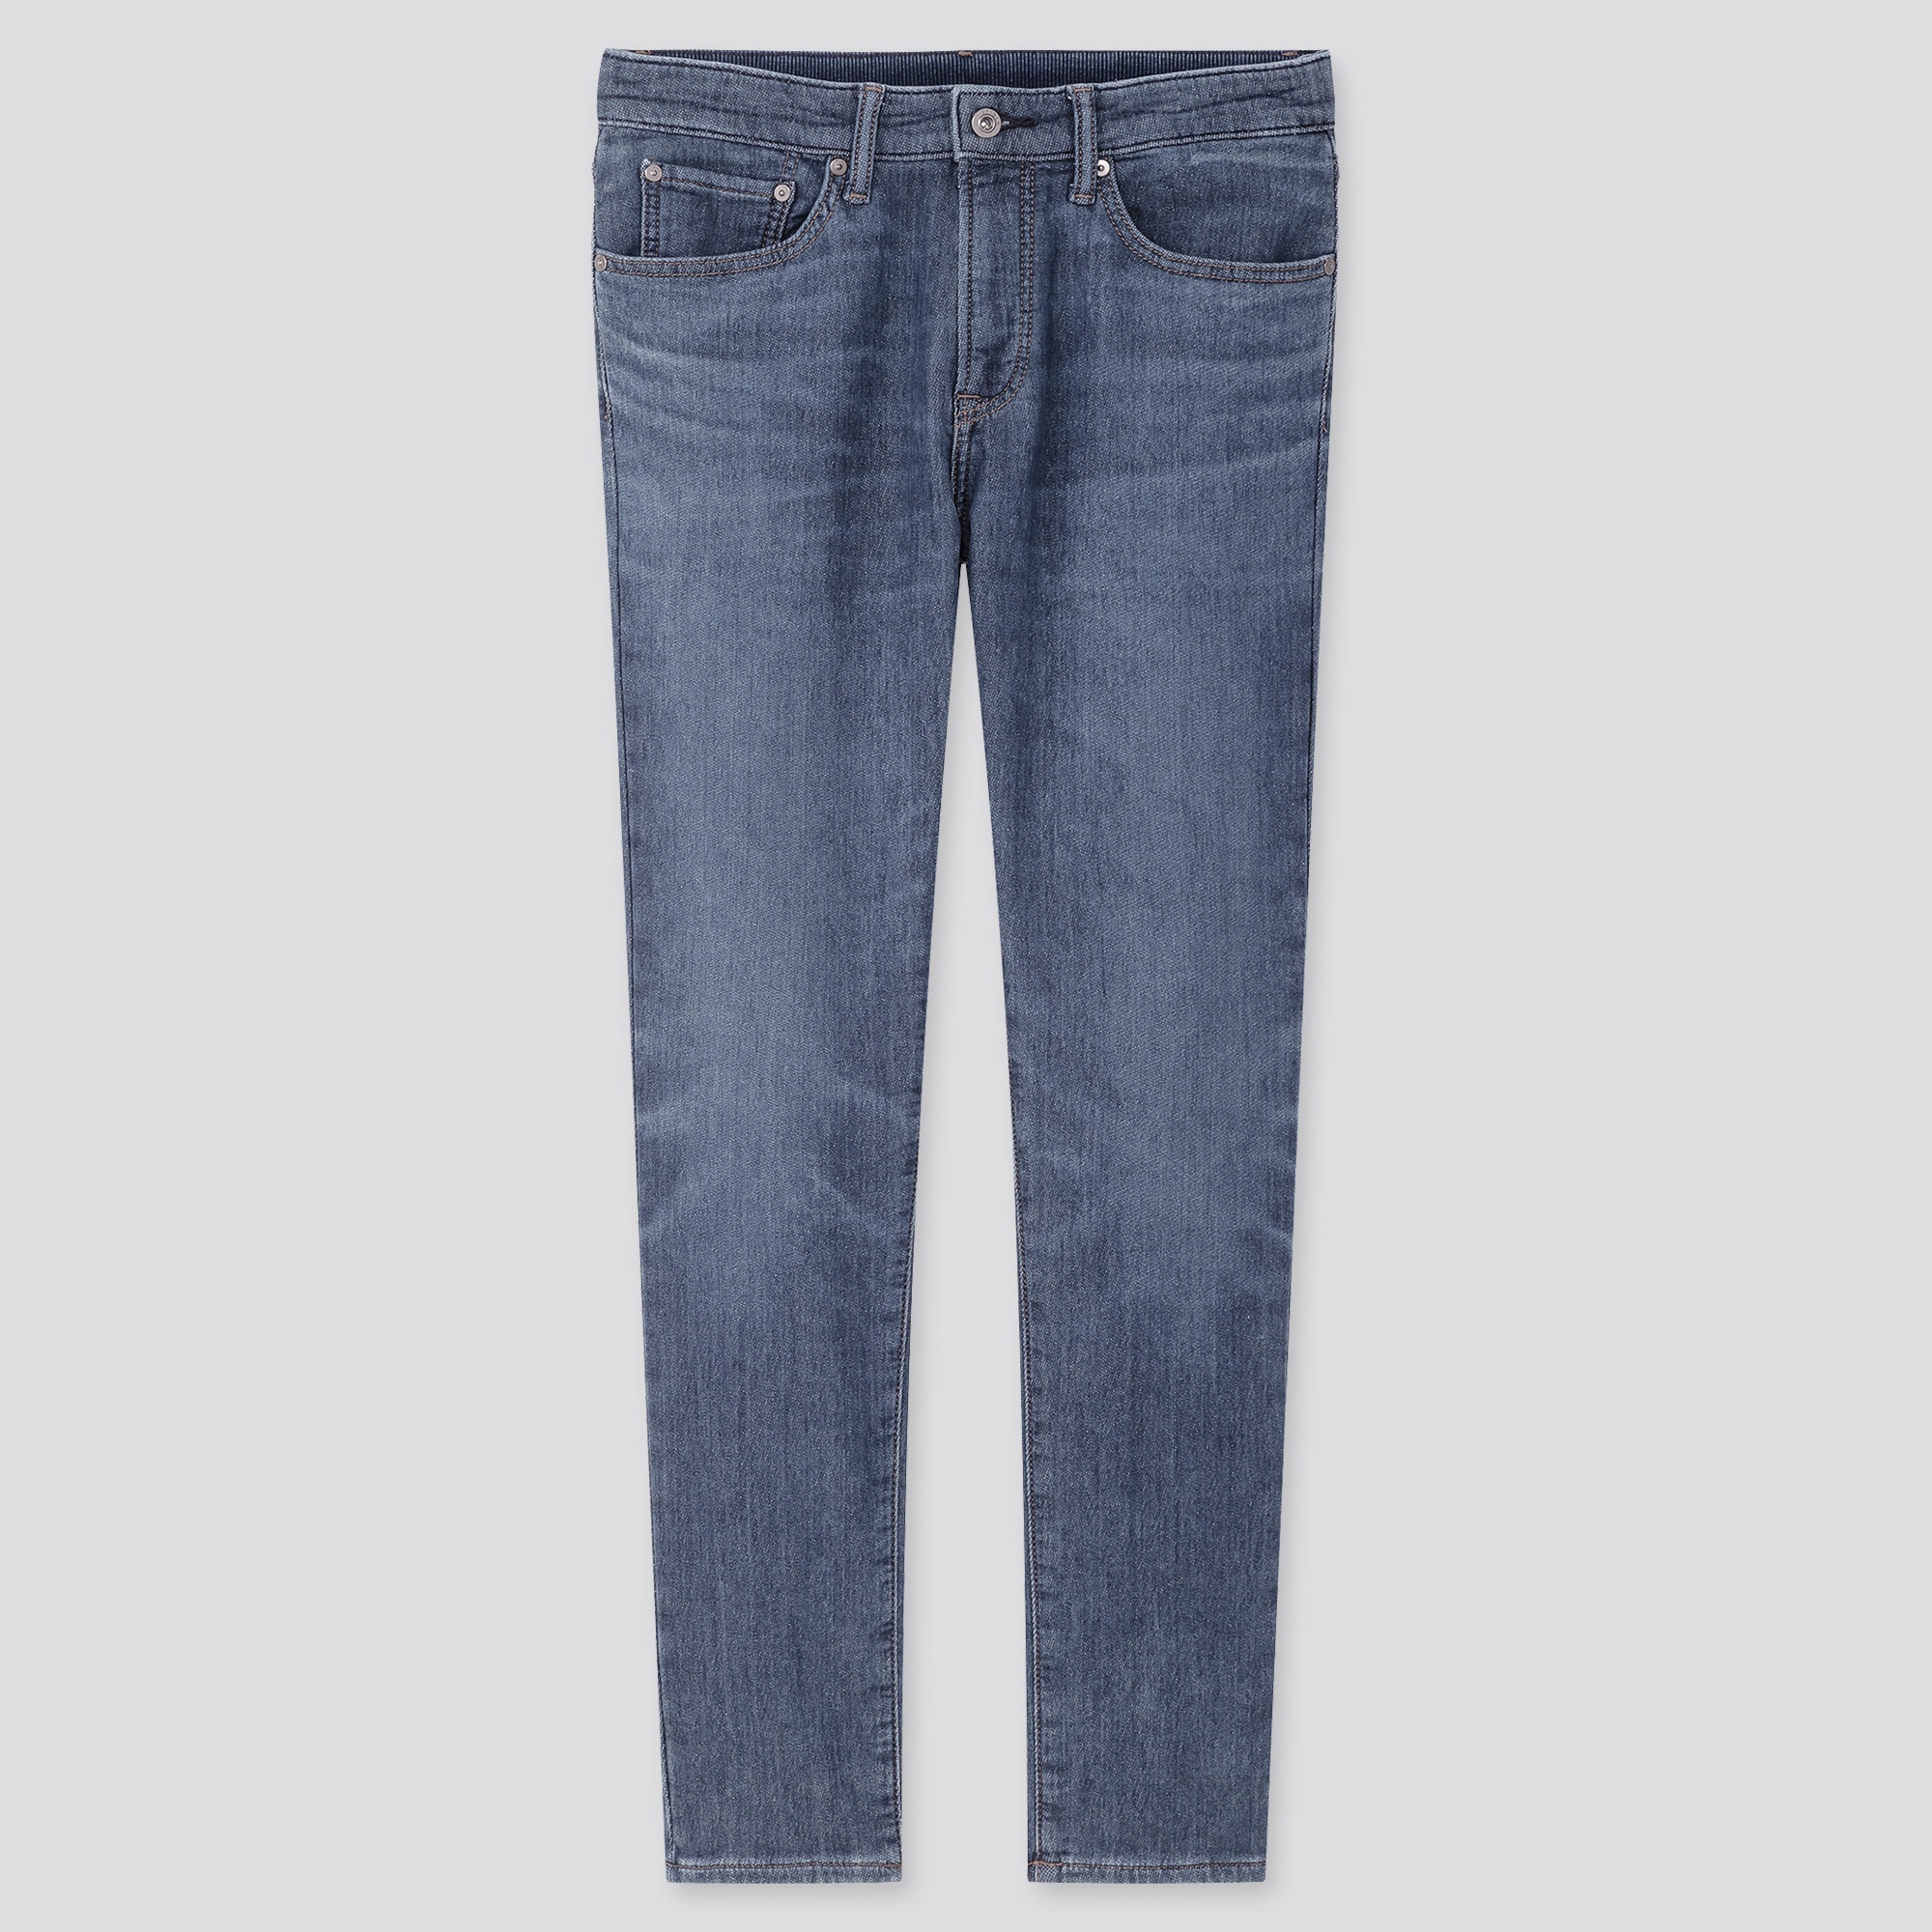 uniqlo ripped jeans